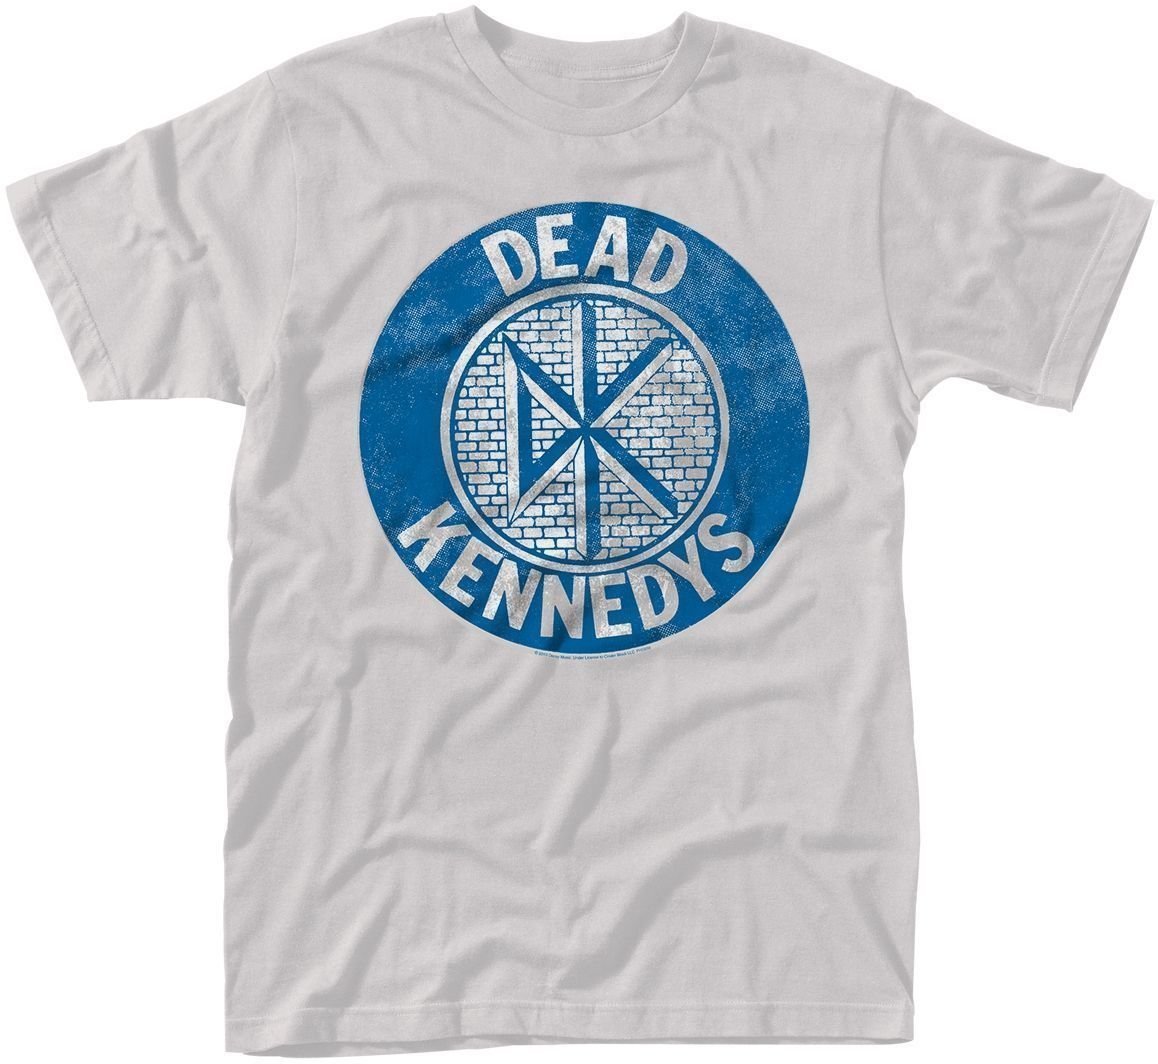 T-Shirt Dead Kennedys T-Shirt Bedtime For Democracy White XL